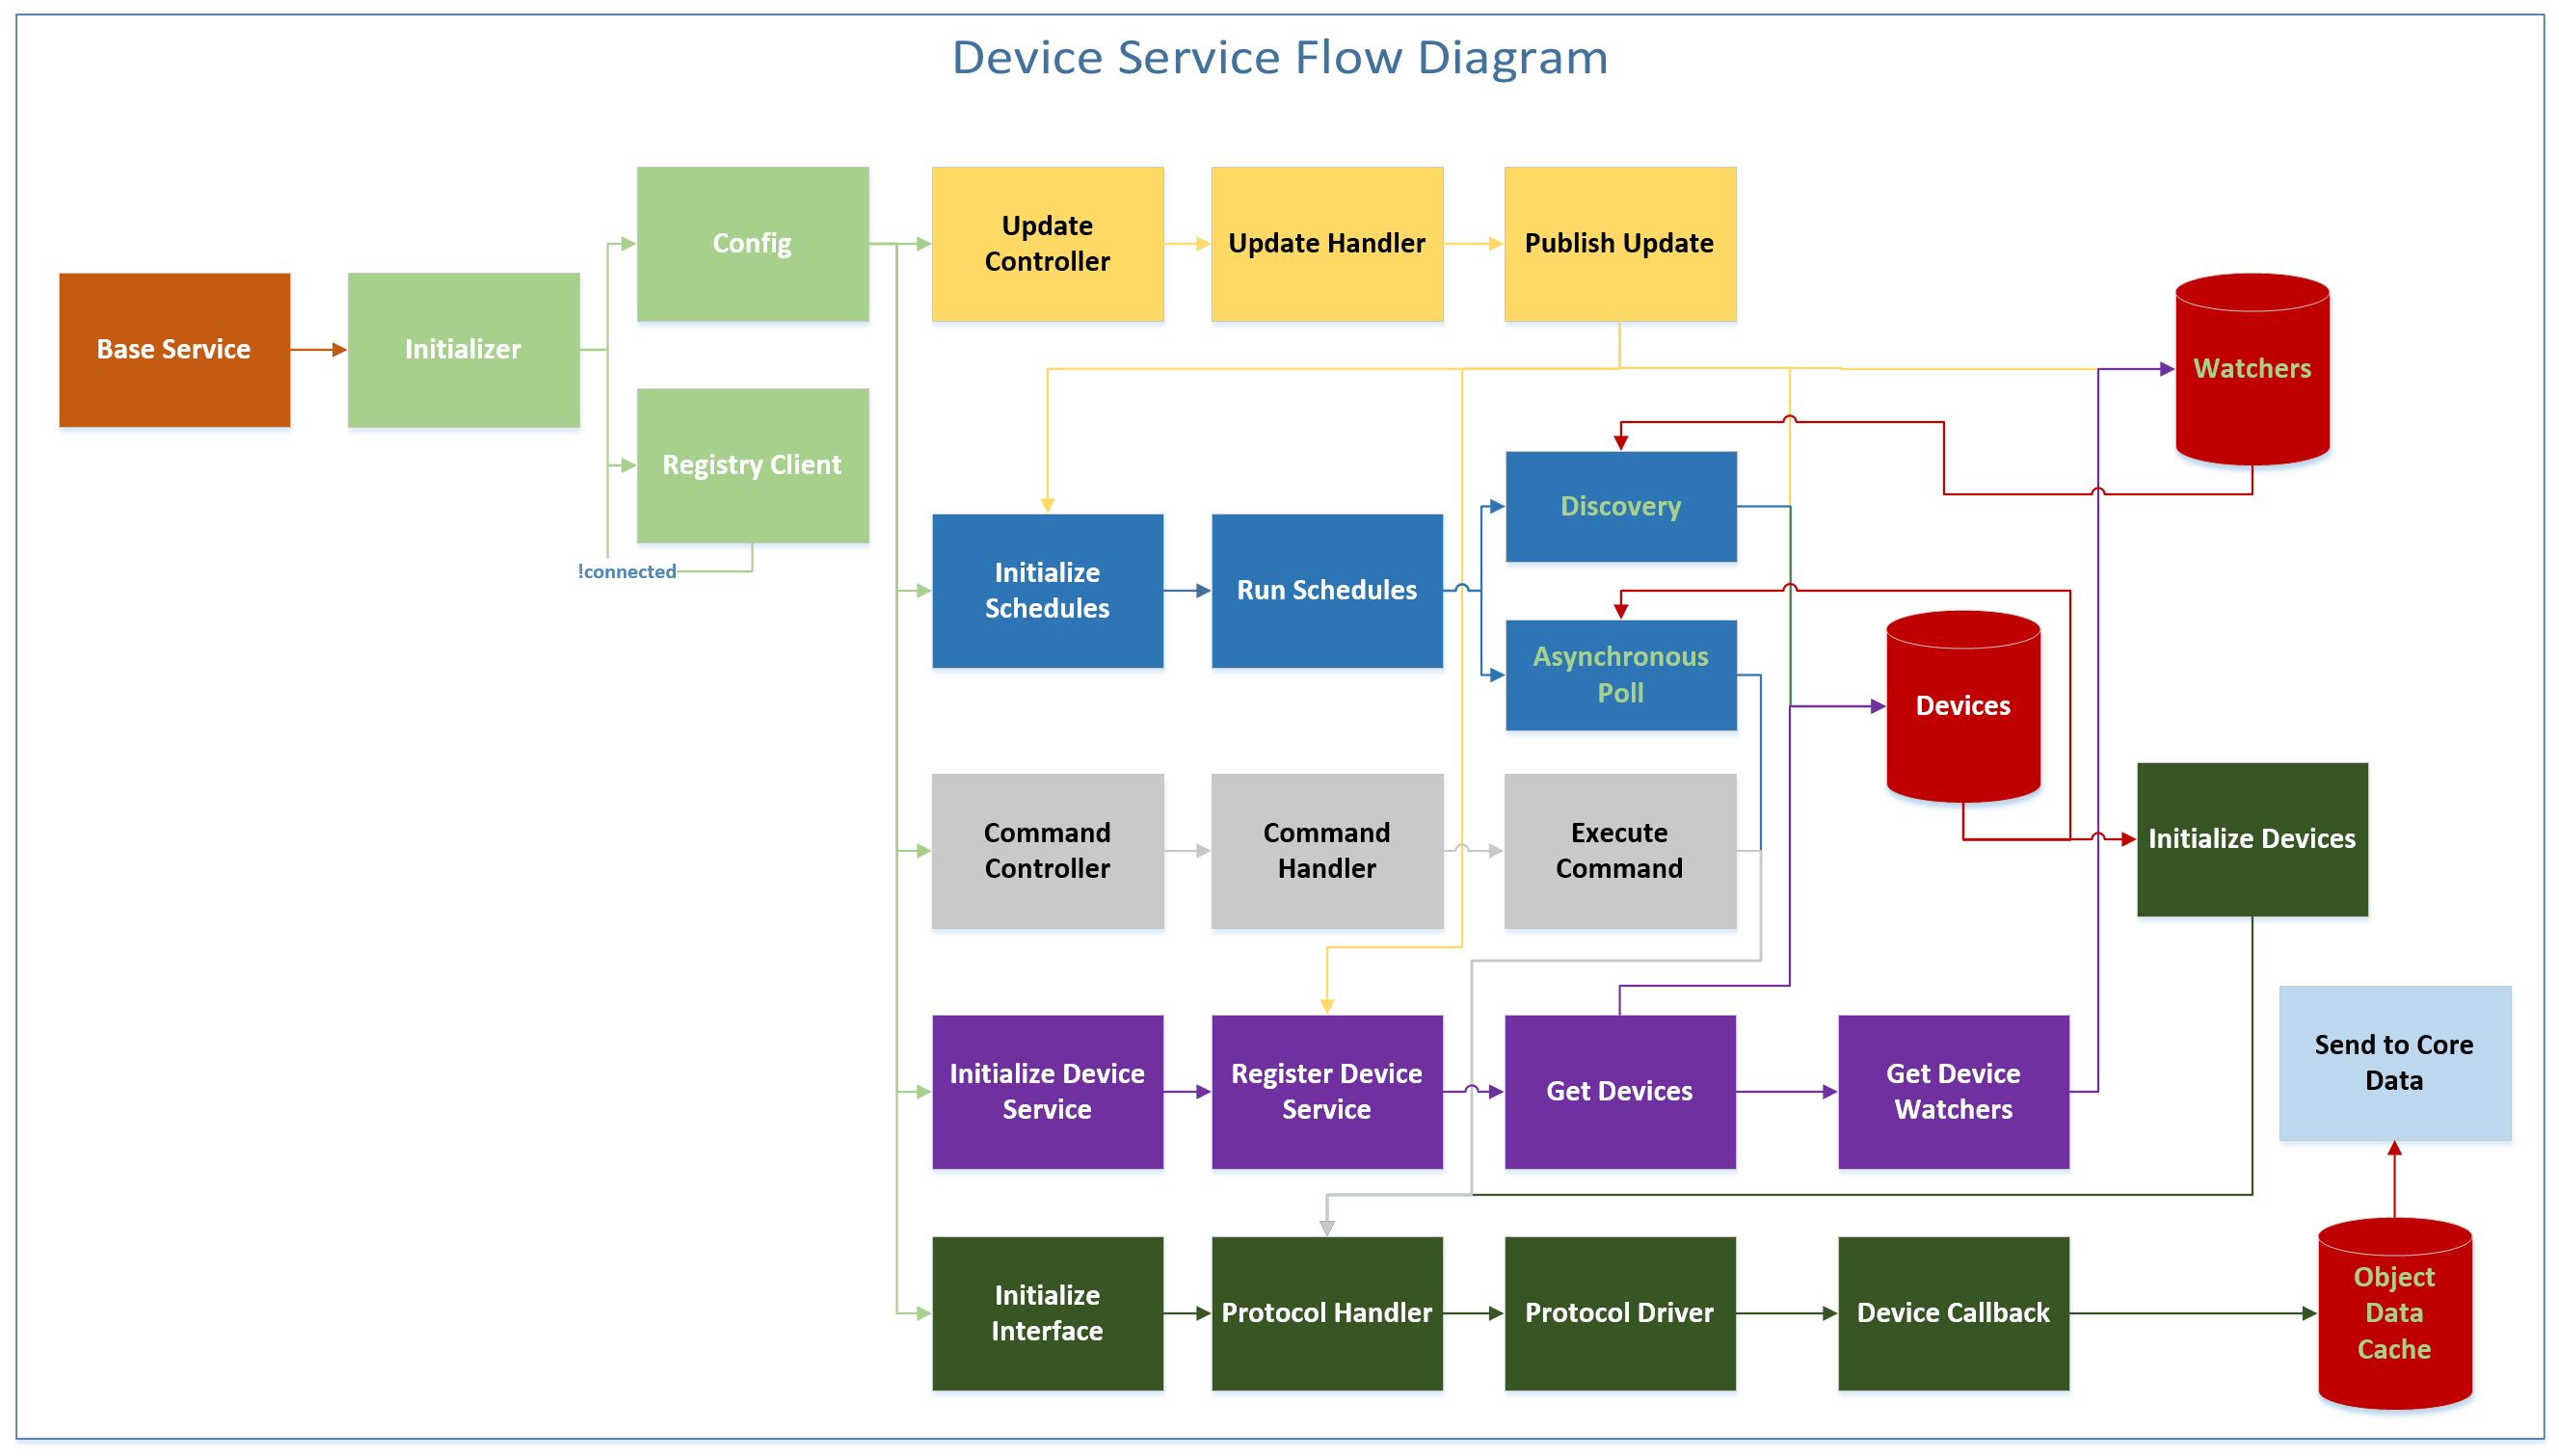 _images/EdgeX_DeviceServiceSDKFlowDiagram.png